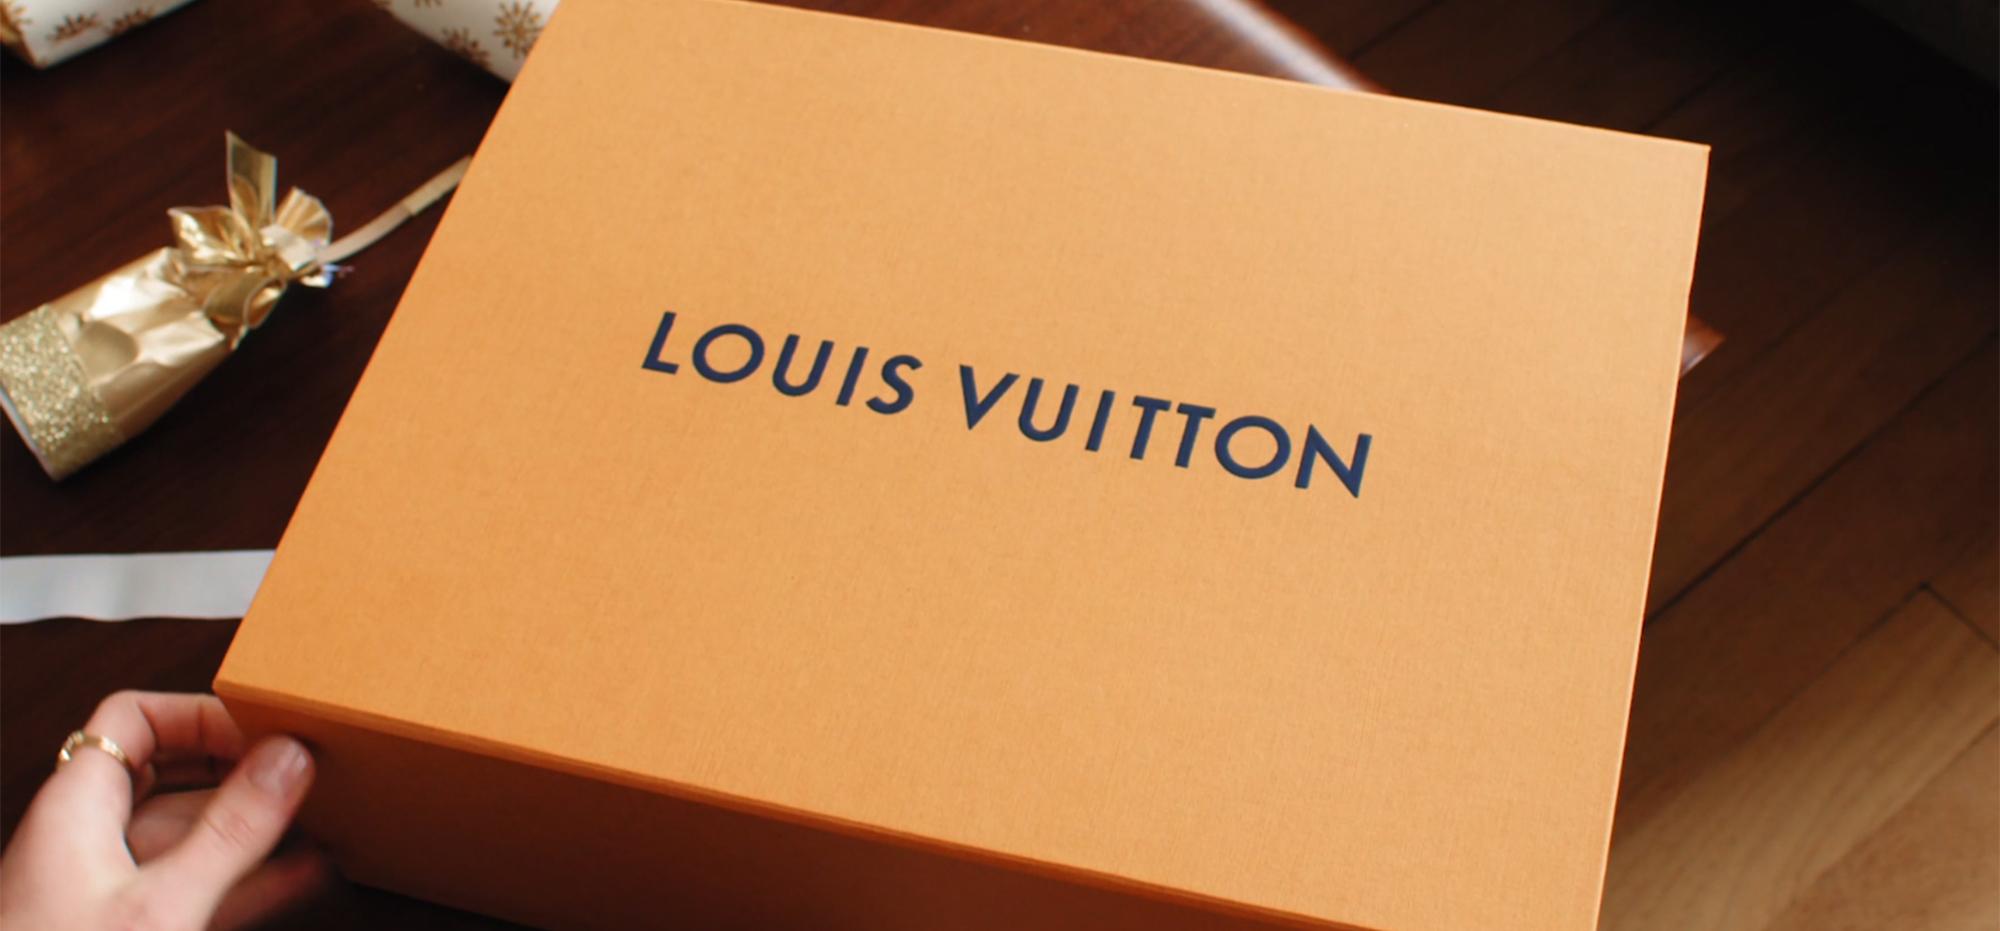 Louis Vuitton Old Vs New Packaging - A Million Dollar Blogger